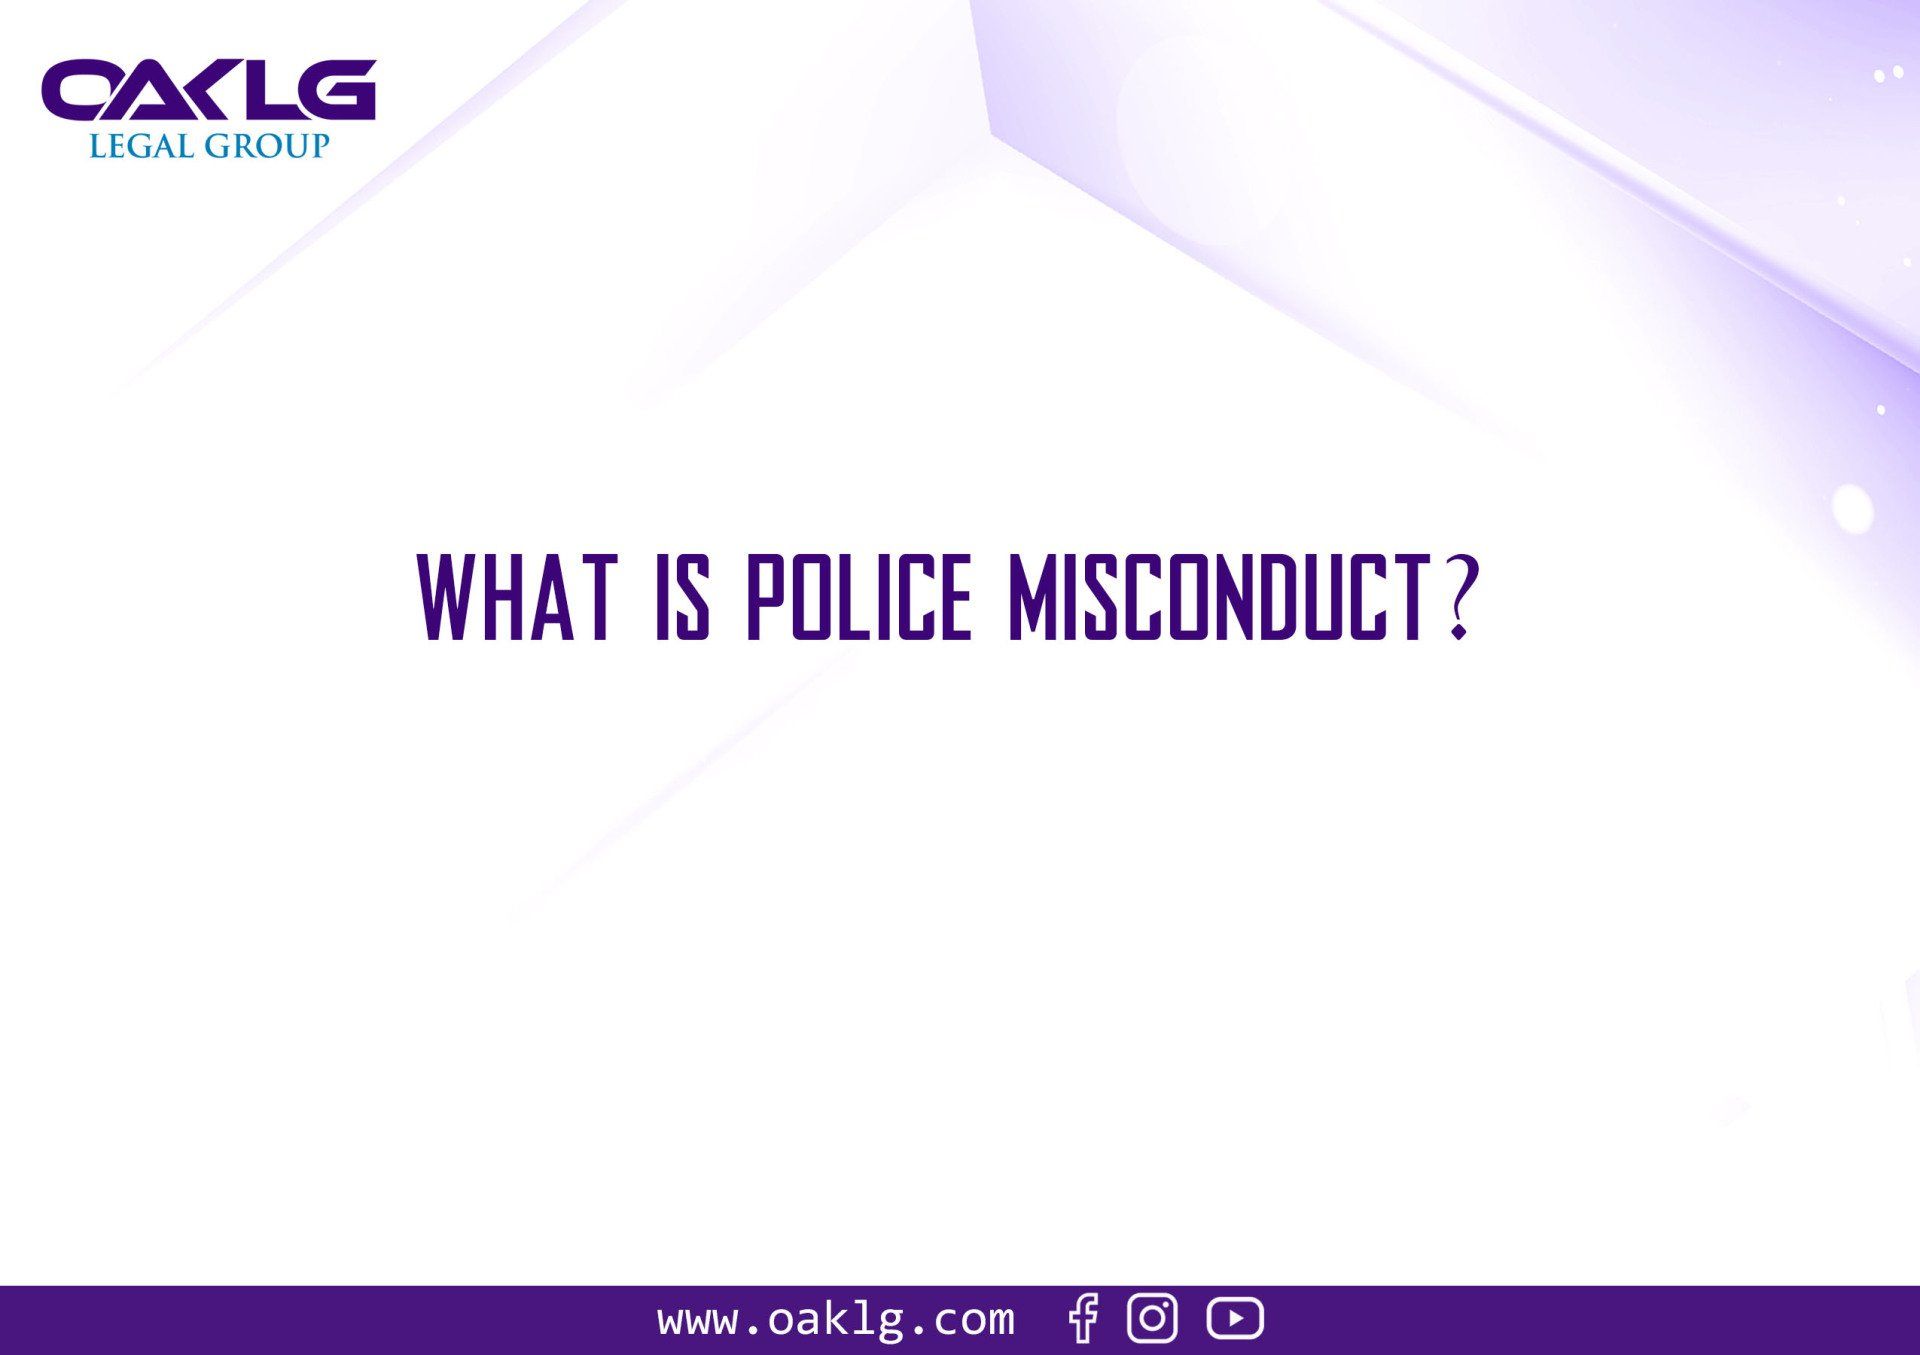 Police Misconduct Defined